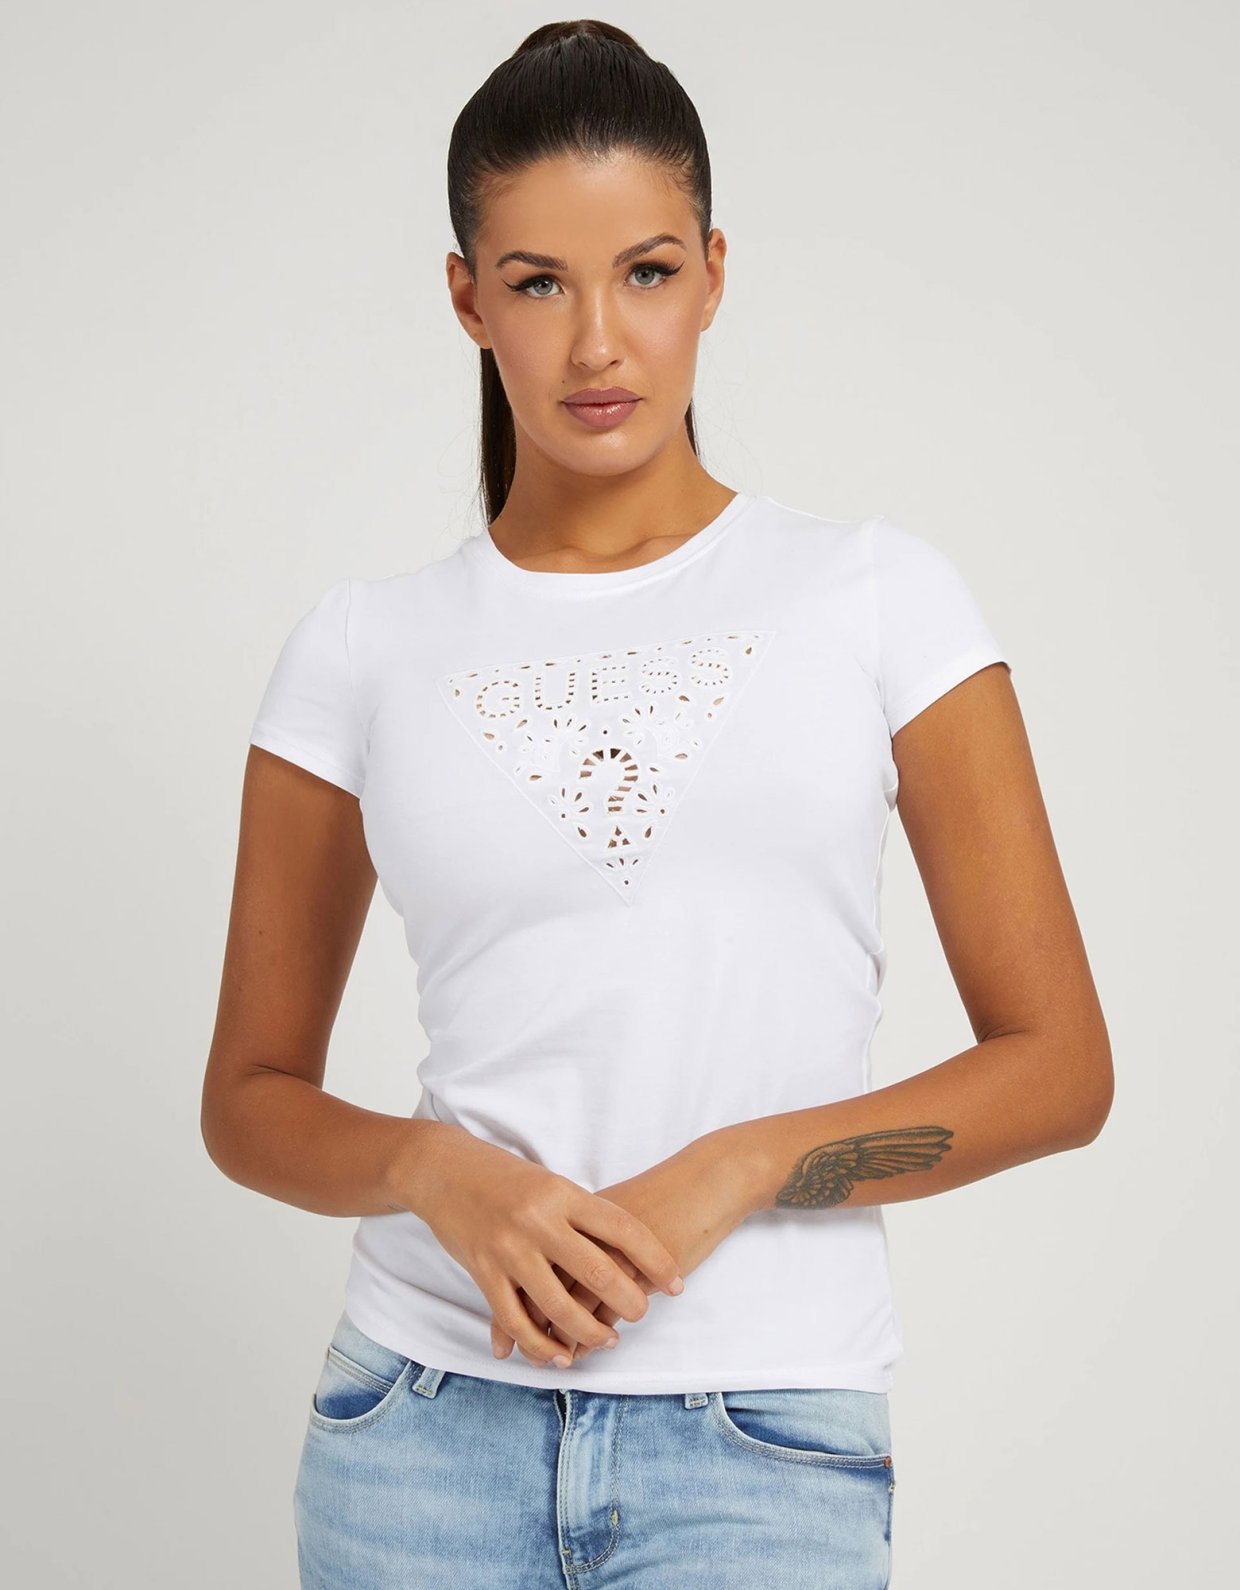 Guess Embroidered logo t-shirt white